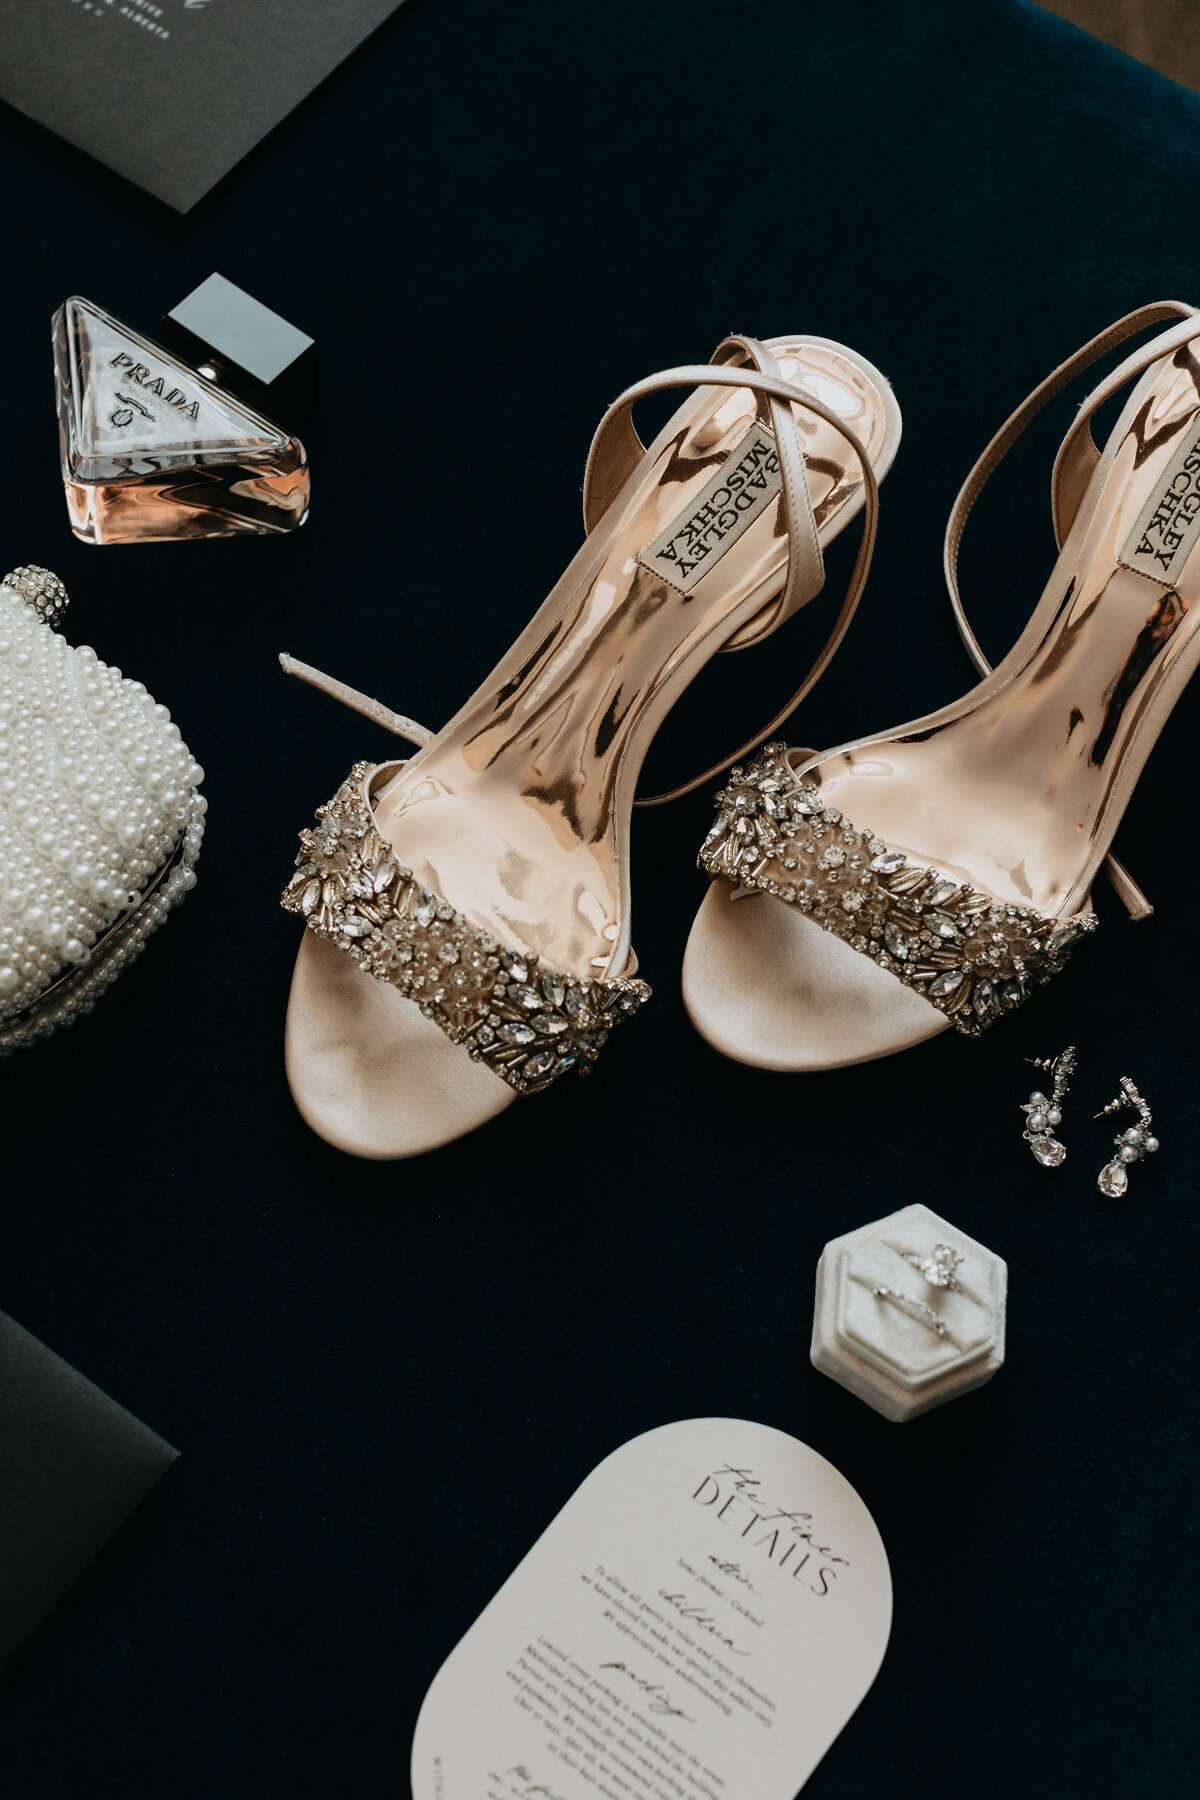 Bride's shoes laid out with her wedding accessories.